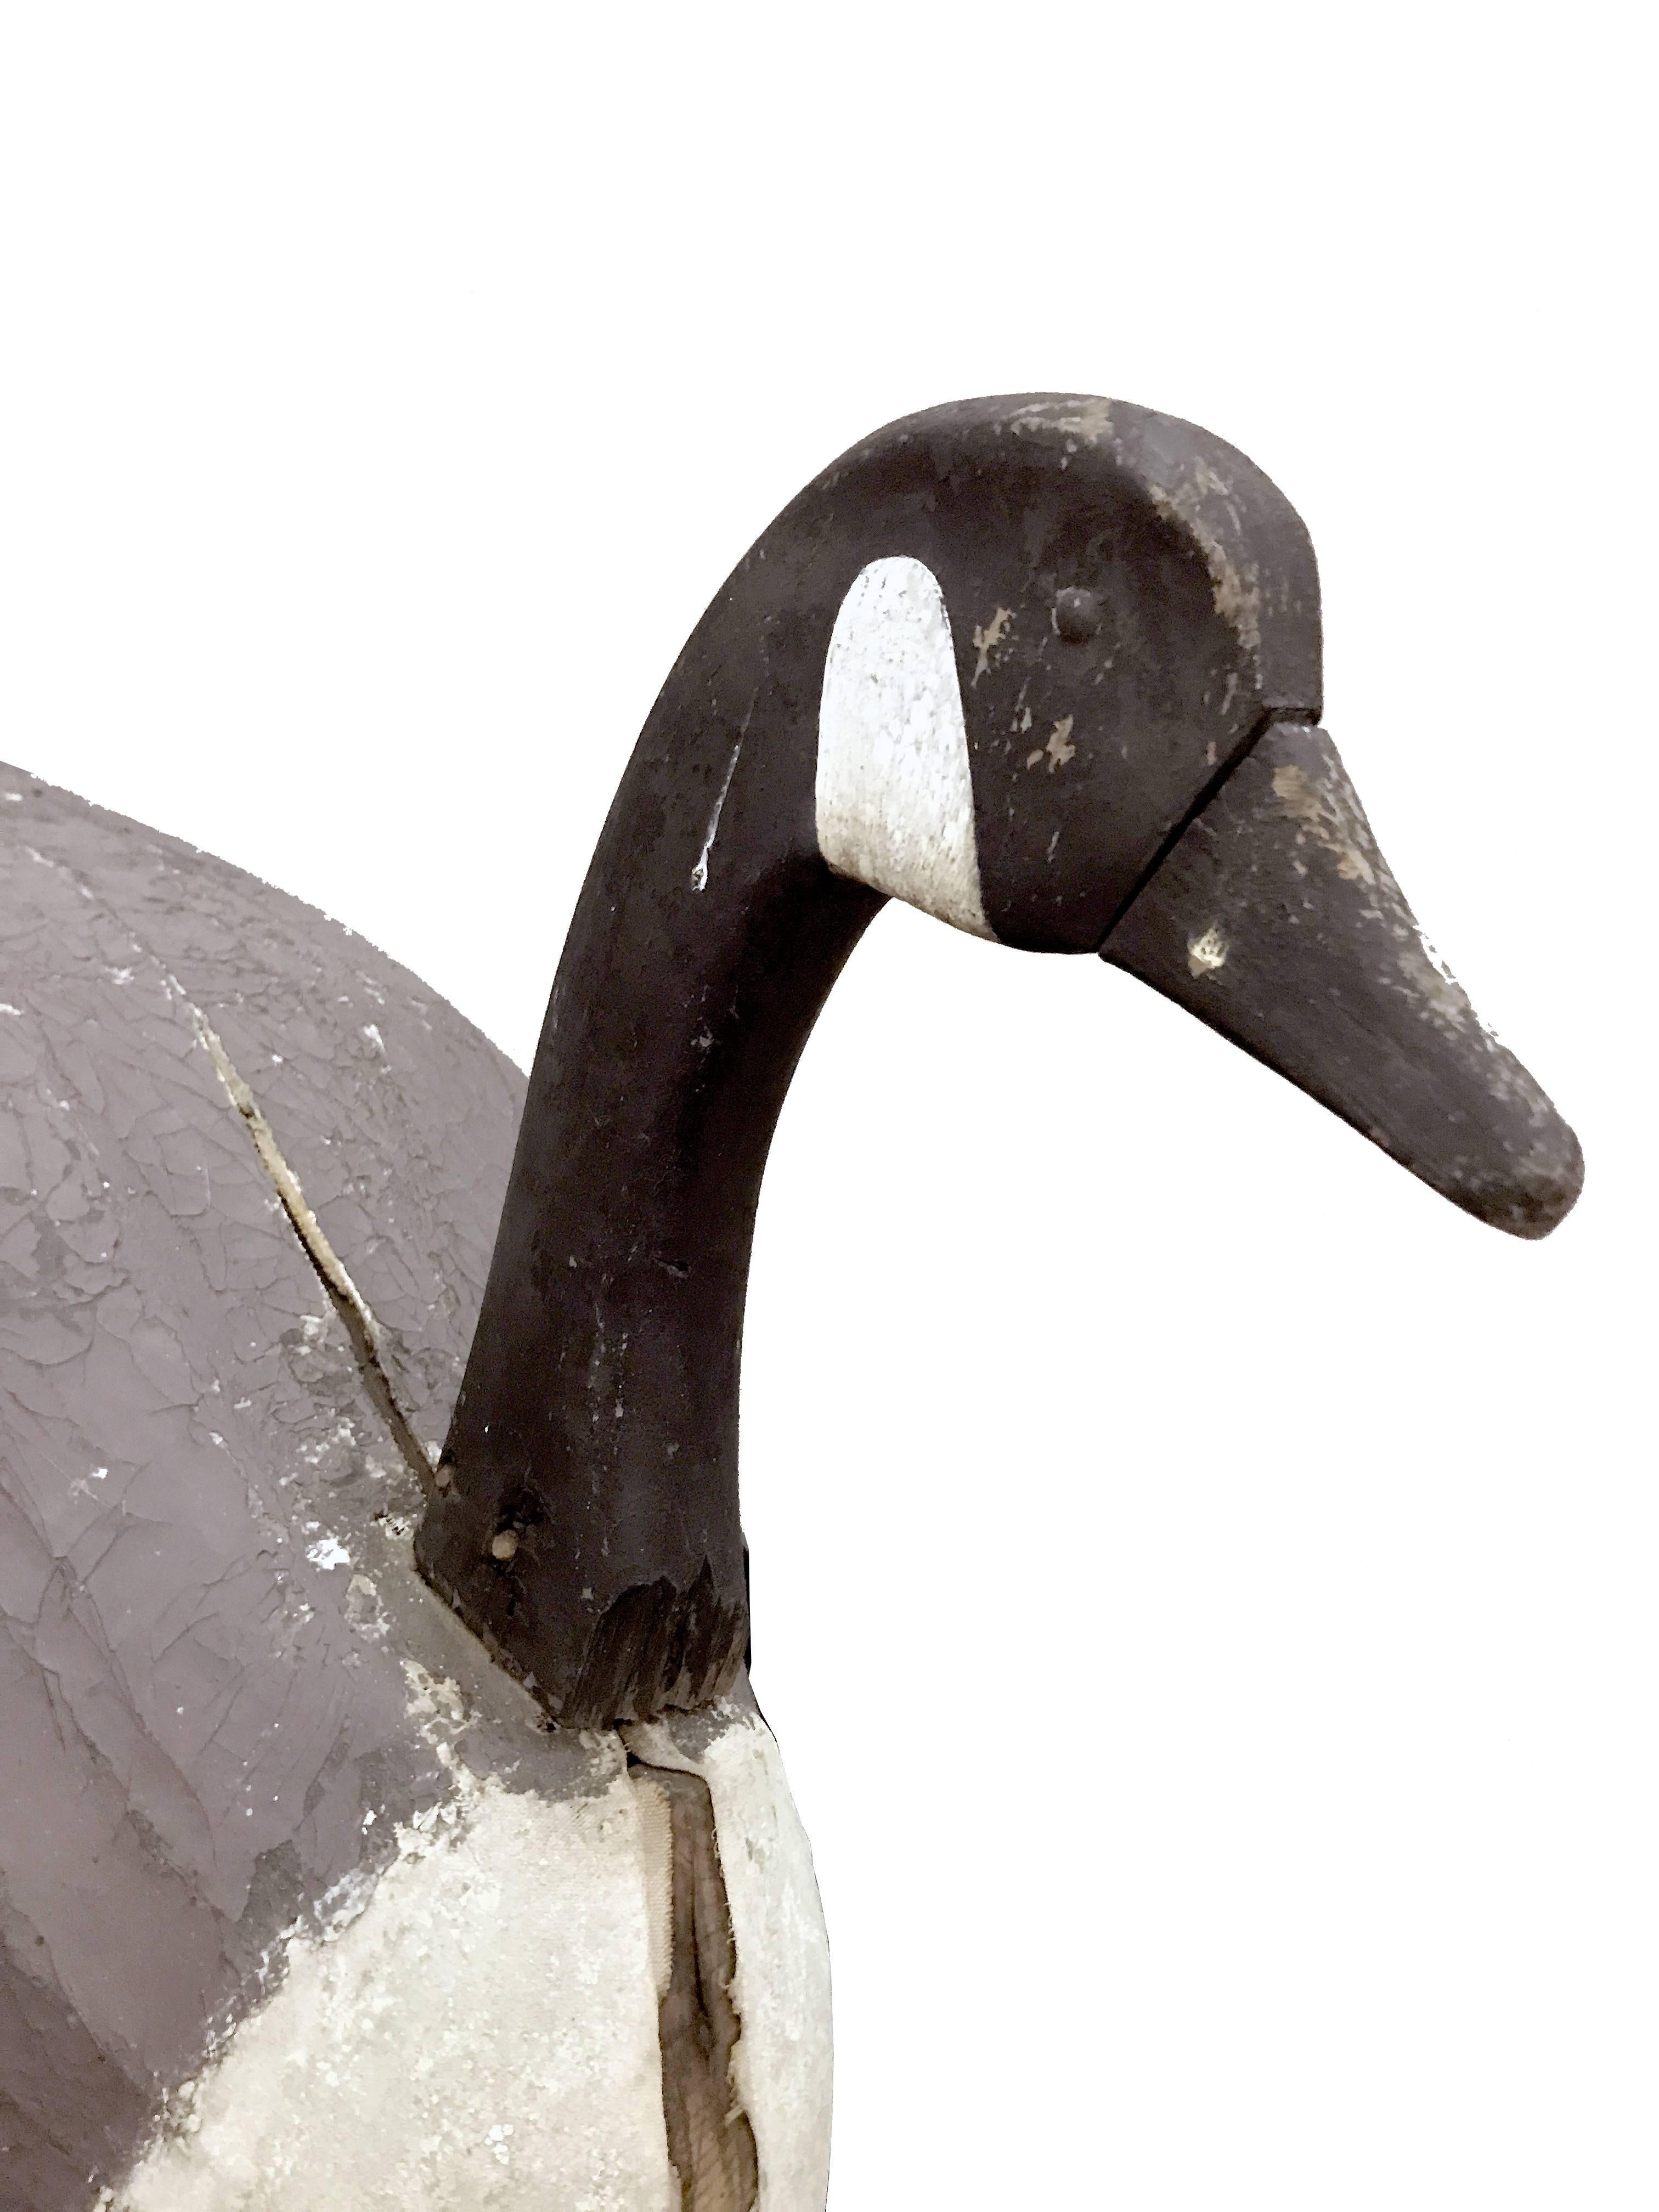 A generously sized decoy in a shape of goose, with body wooden framed and covered with painted canvas. Wooden neck and head.
USA, circa 1900.